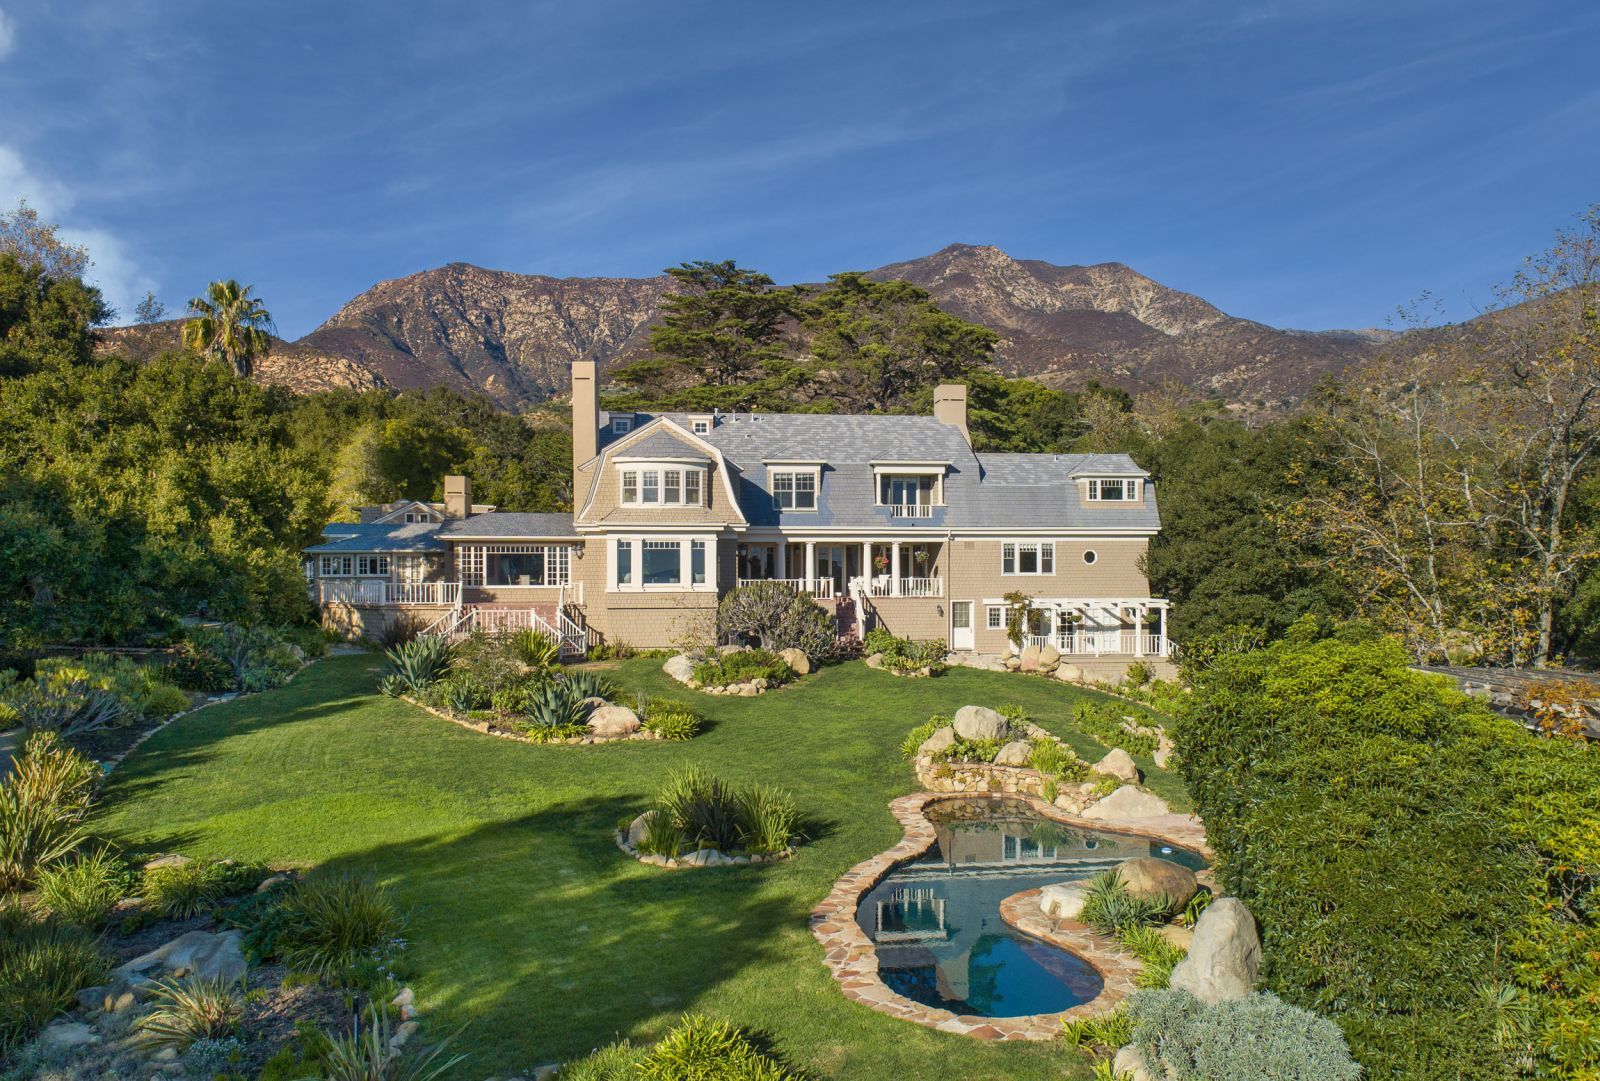 The back yard of a Cape Code Style Estate for sale in Montecito, with a sprawling lawn and freeform pool in the foreground